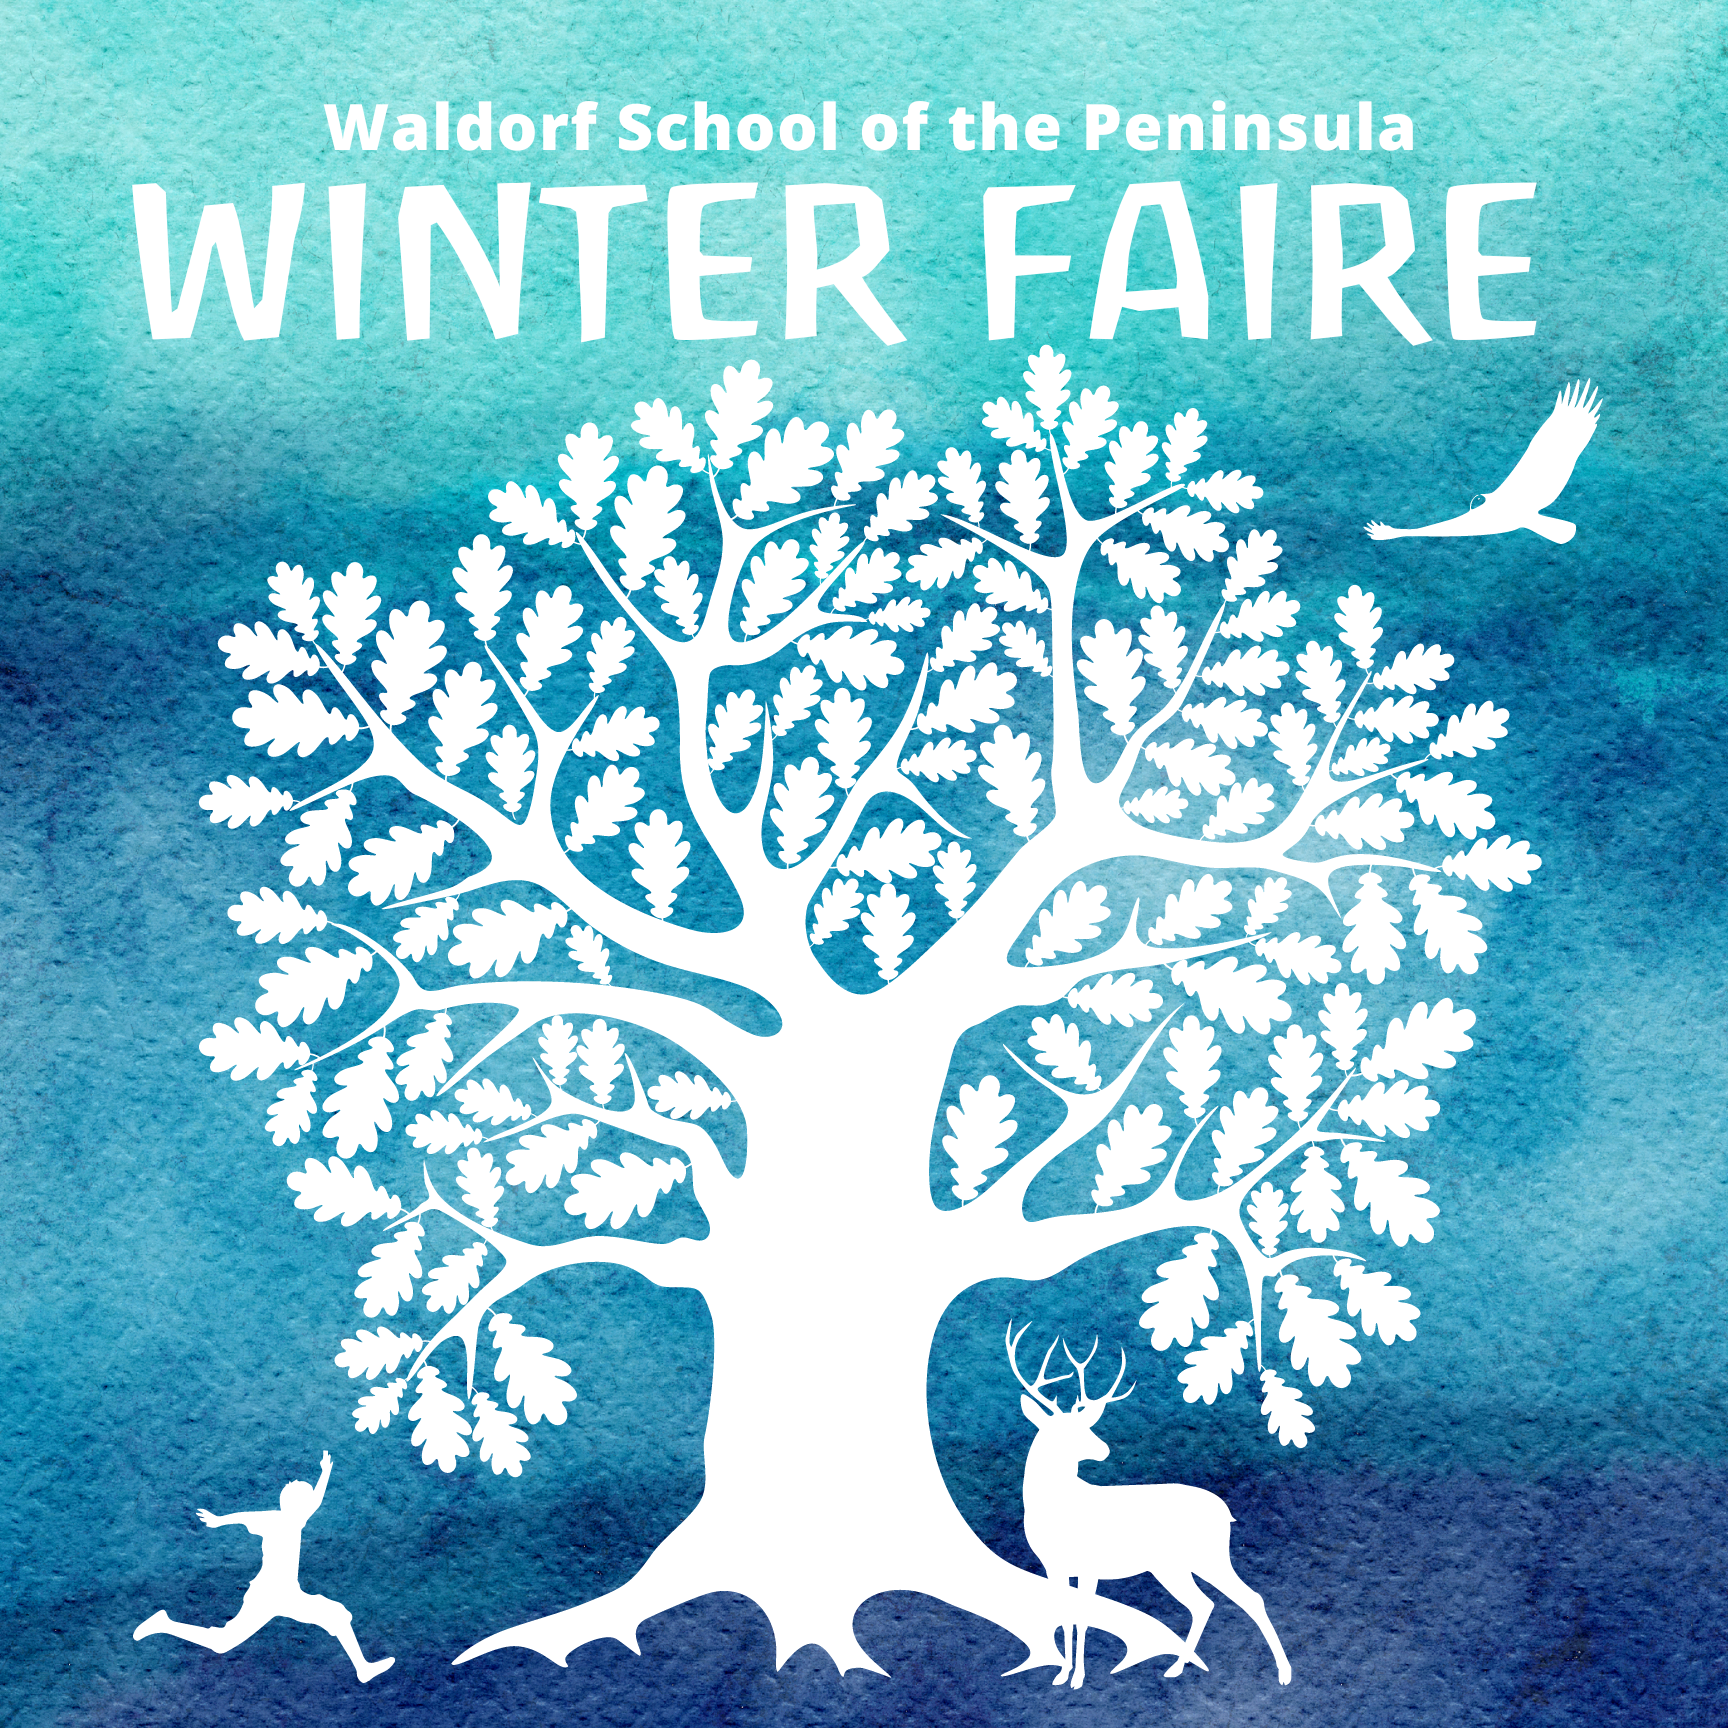 Watercolor image of an oak tree with Waldorf School of the Peninsula Winter Faire